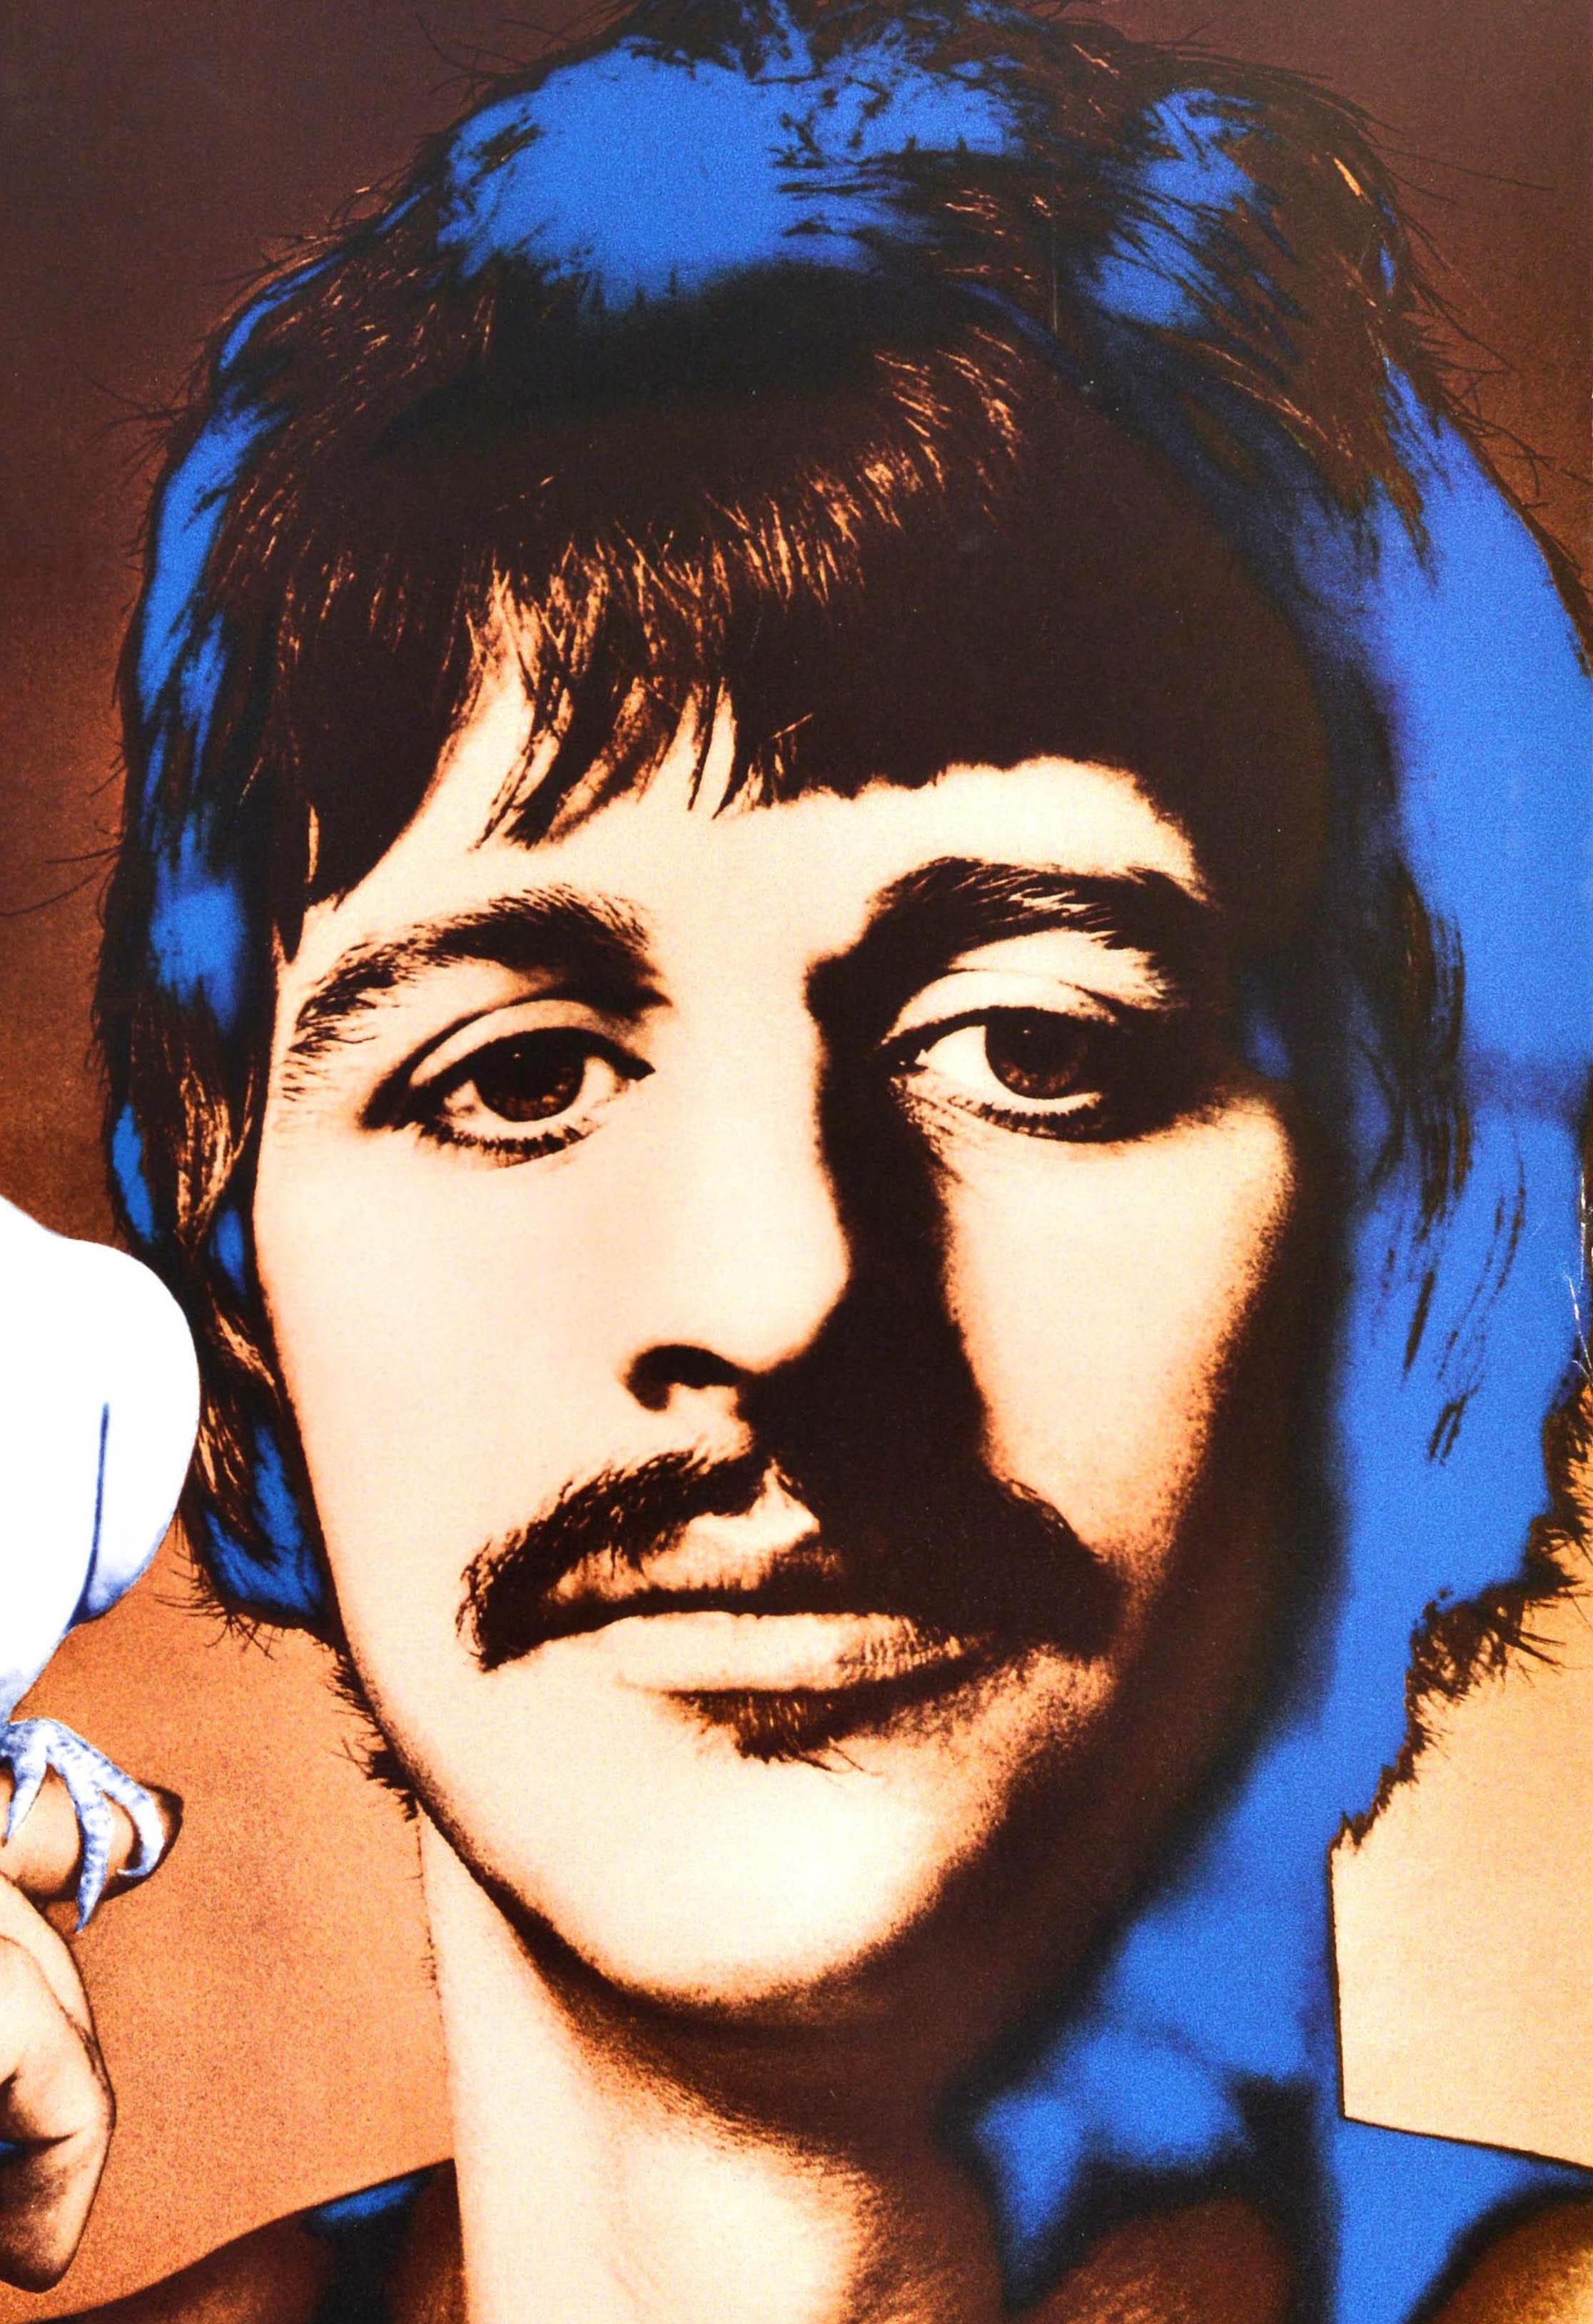 Original vintage music advertising poster featuring a colourful and psychedelic photo design using a new solarisation technique by the American photographer Richard Avedon (1923-2004) of the Beatles musician and singer songwriter Ringo Starr